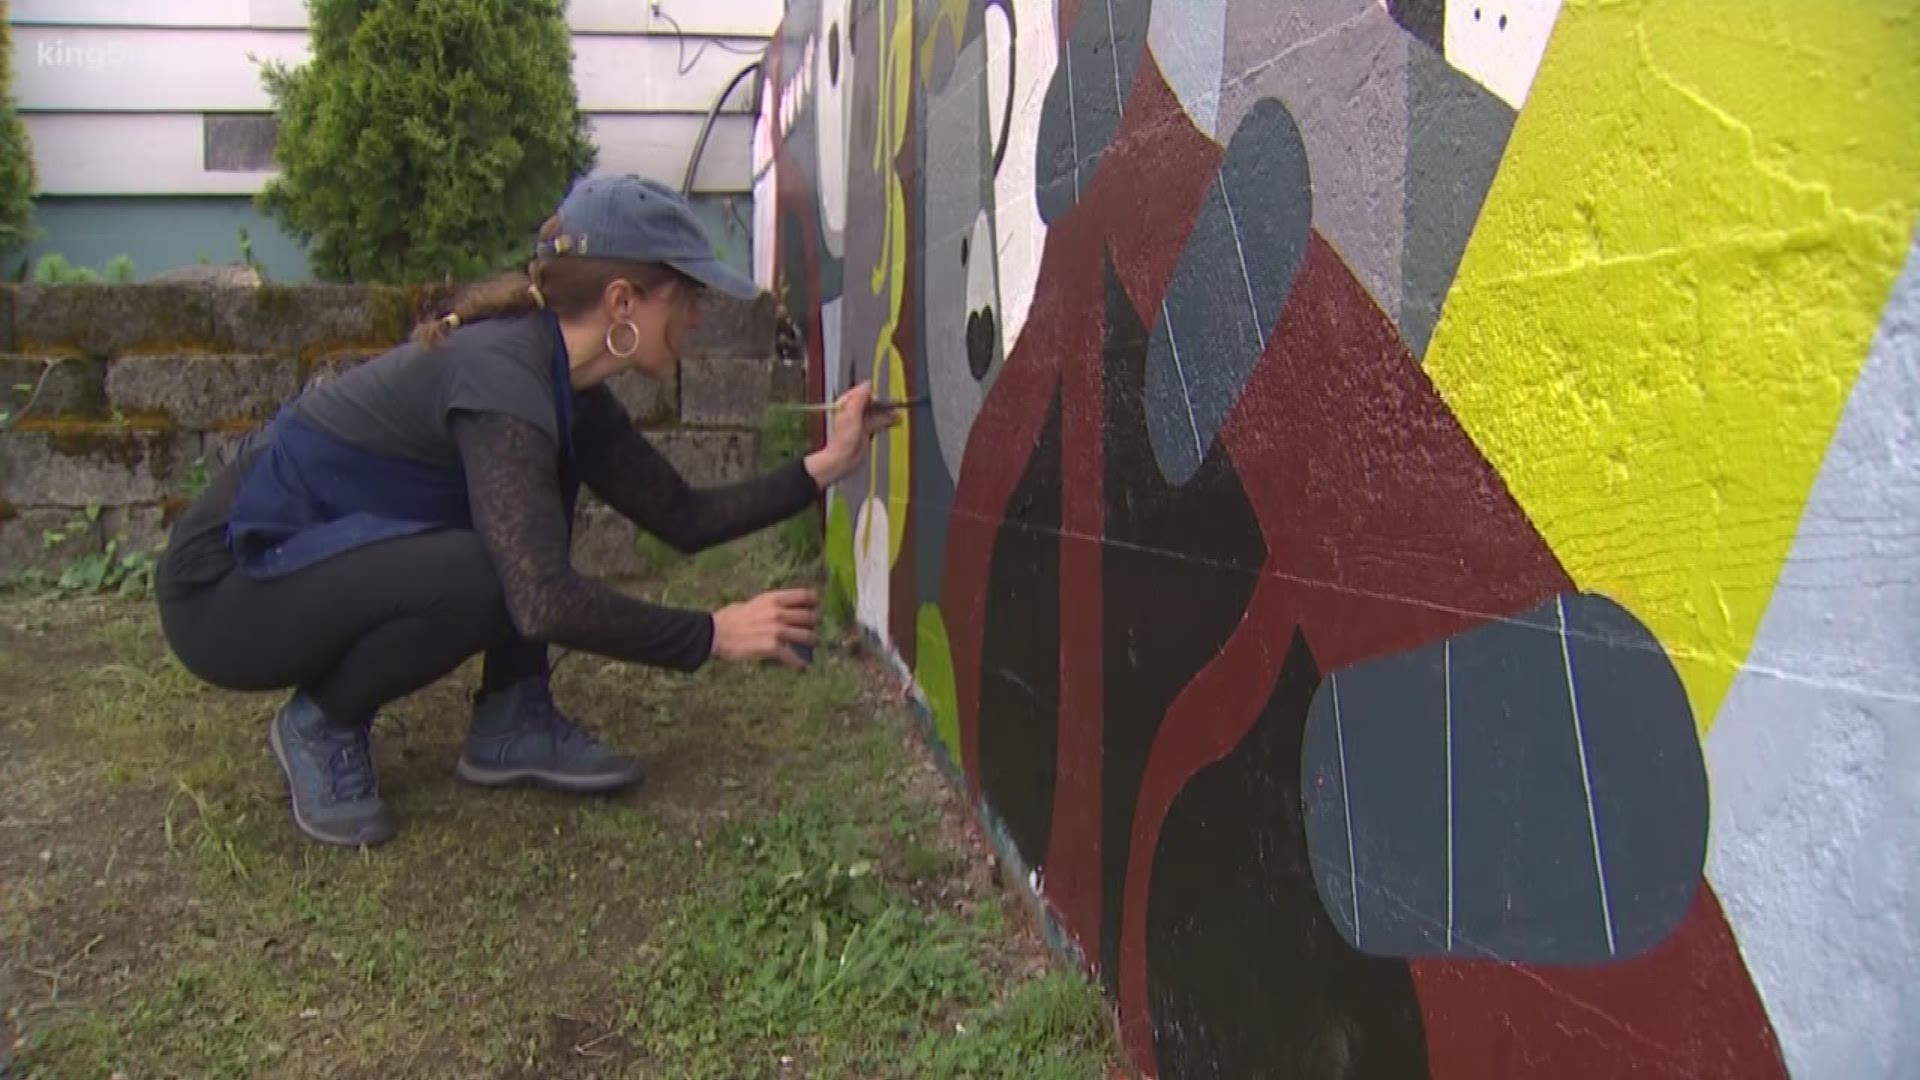 A Seattle couple has a cool opportunity for up and coming artists. Their garage faces a busy road. And they've turned the facade into a revolving canvas for street art!